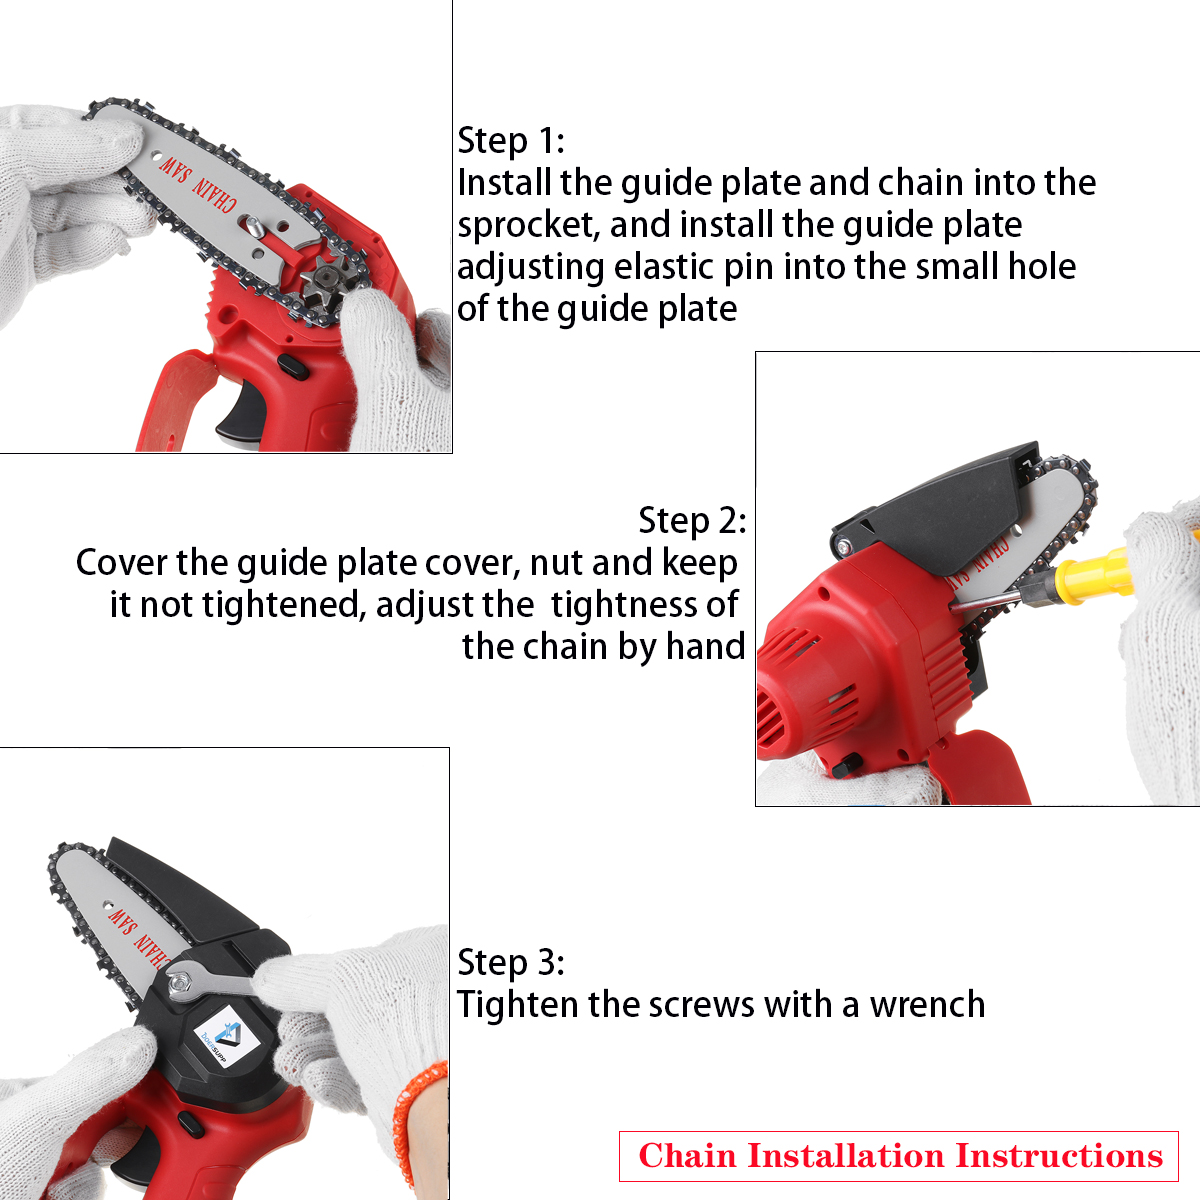 1000W-4Inch-Cordless-Electric-Chain-Saw-Wood-Mini-Cutter-One-Hand-Saw-Woodworking-Tool-W-None1pc-Bat-1833244-14